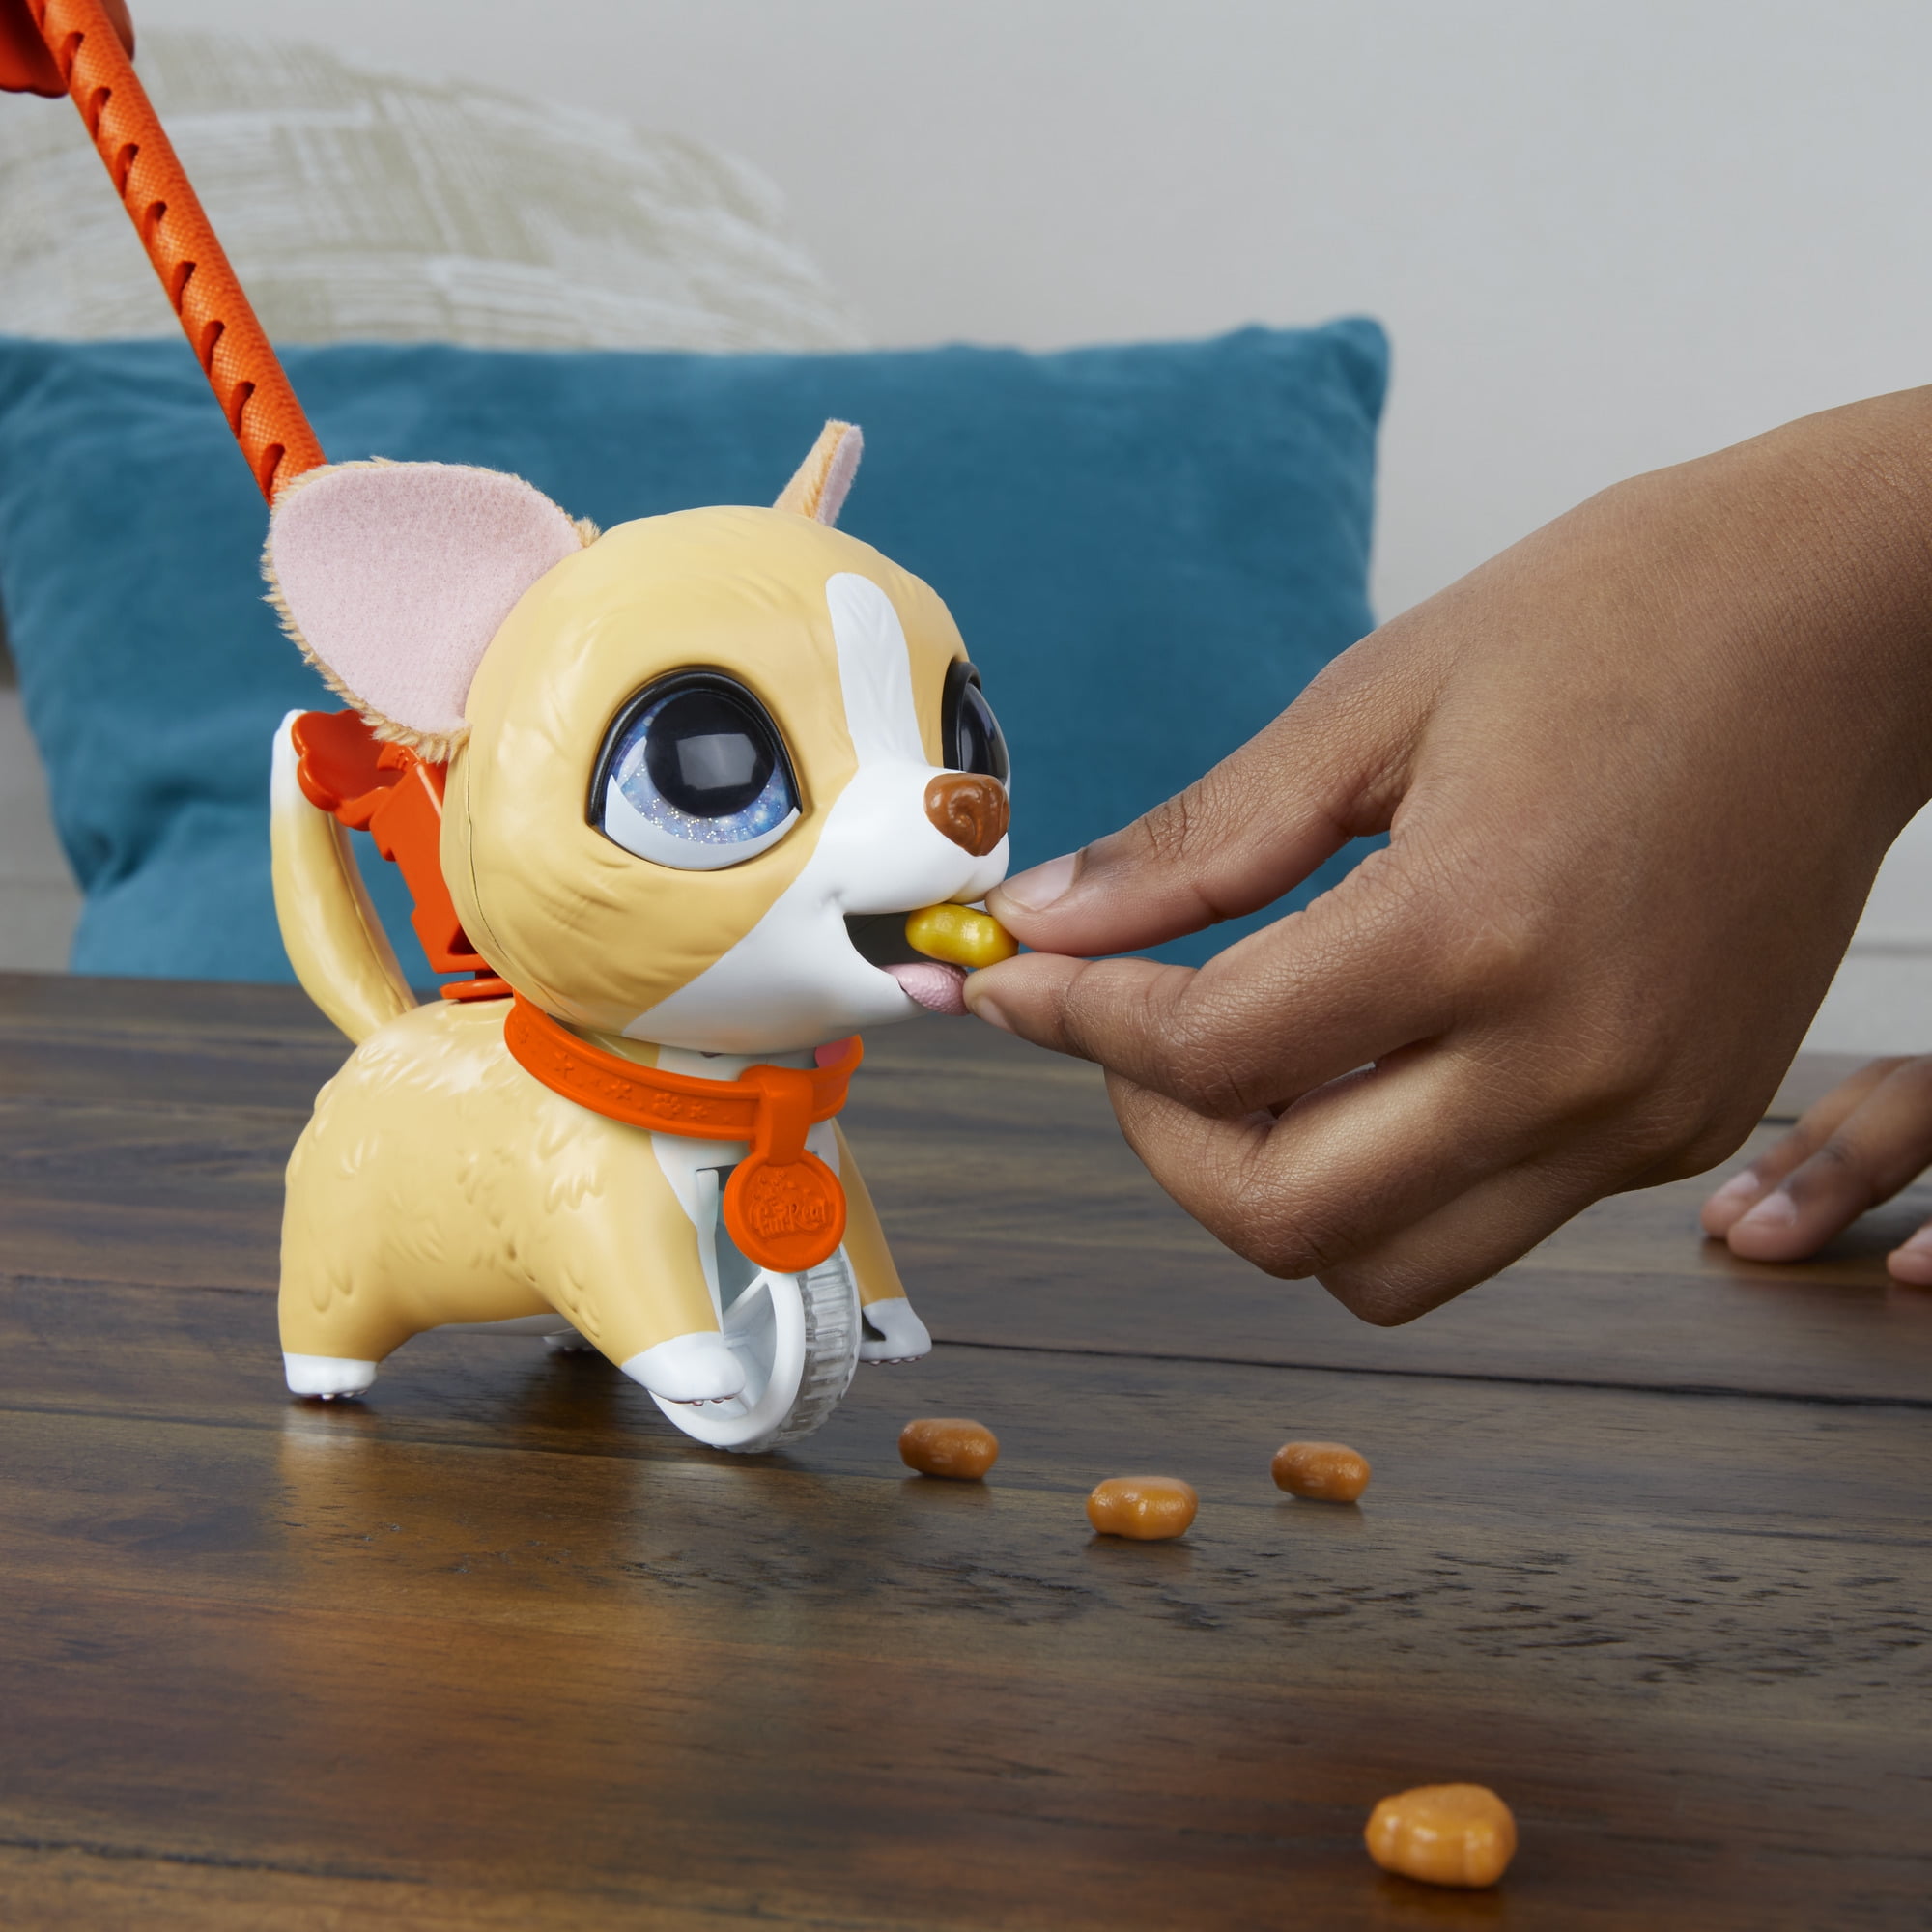 FurReal Poopalots Lil'wags Interactive Toy Connectible Leash System Tabby Cat for sale online 